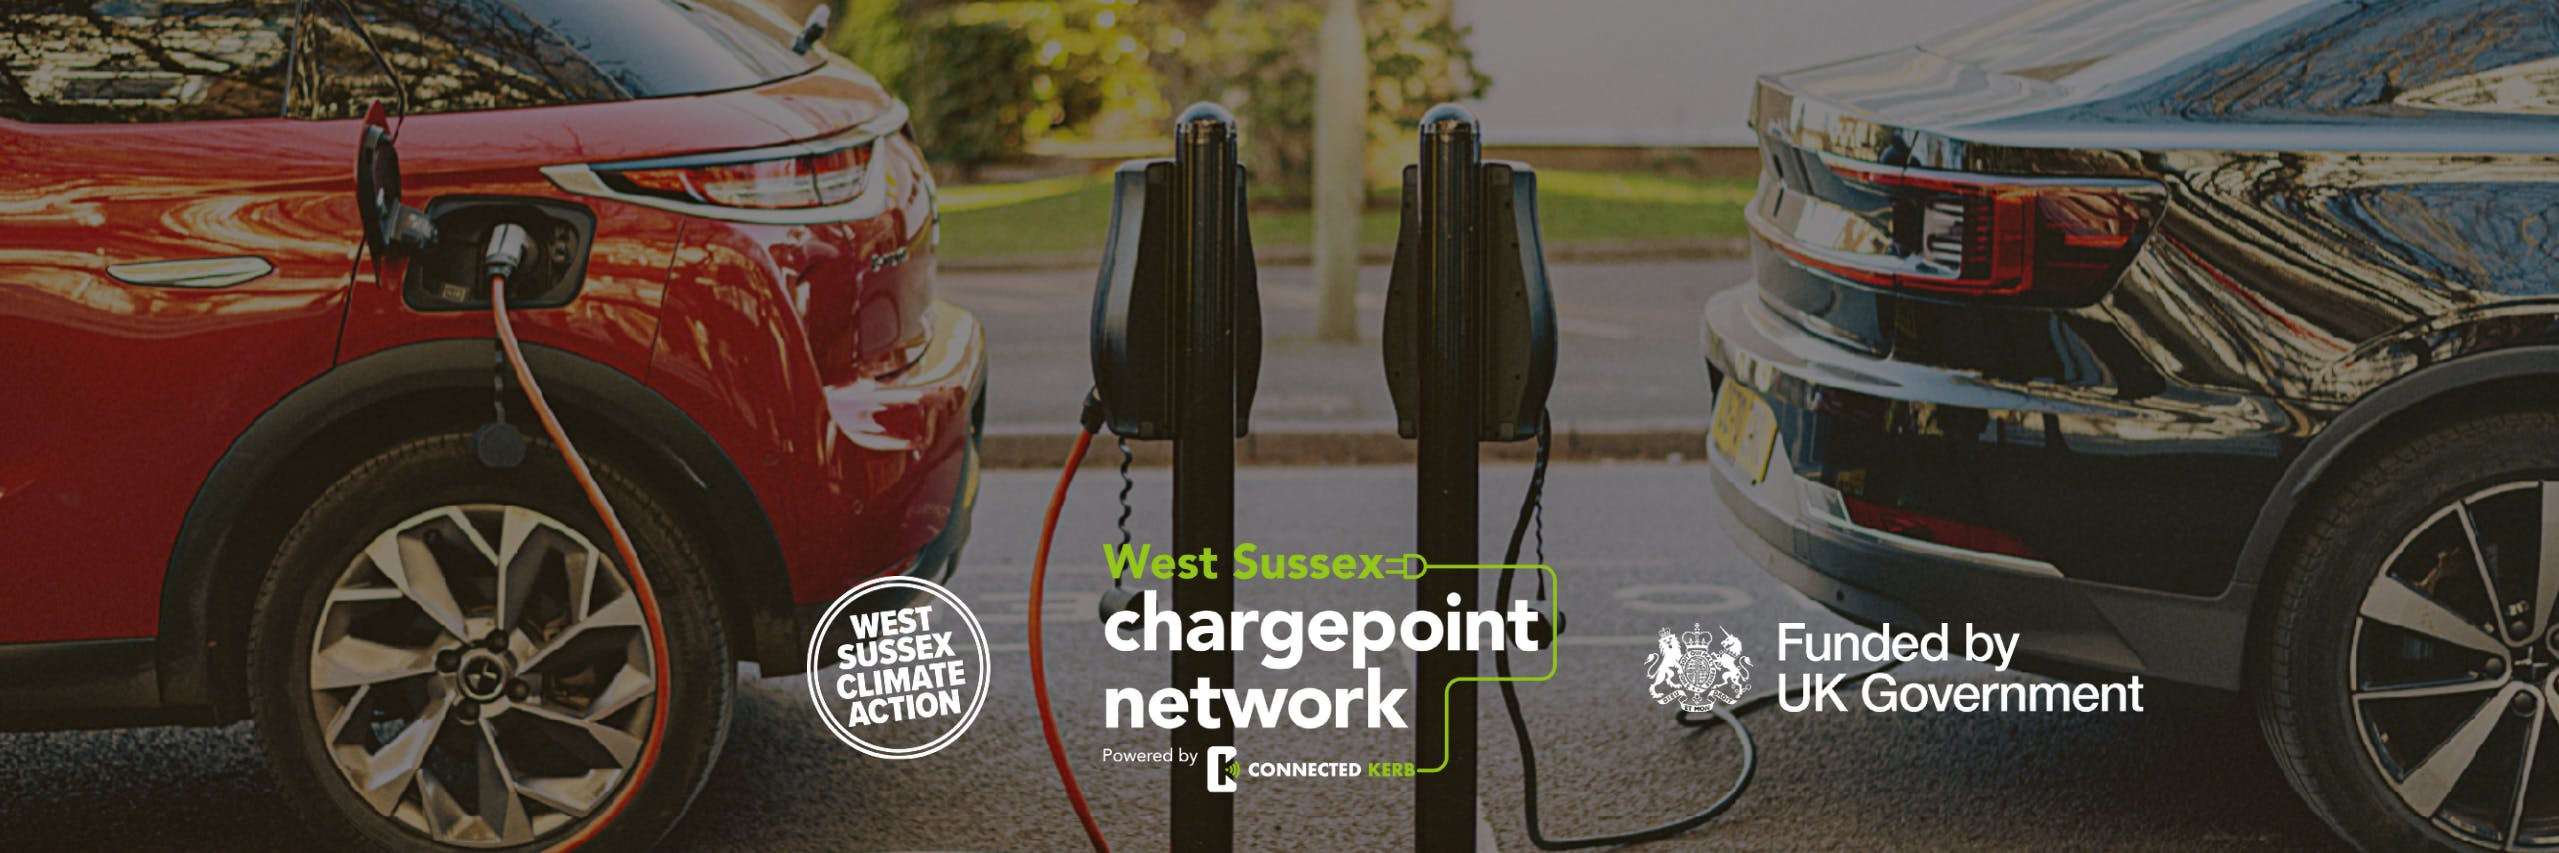 Cars charging at EV chargepoints . West Sussex Climate Action, West Susses Chargepoint Network logos. Government funded.